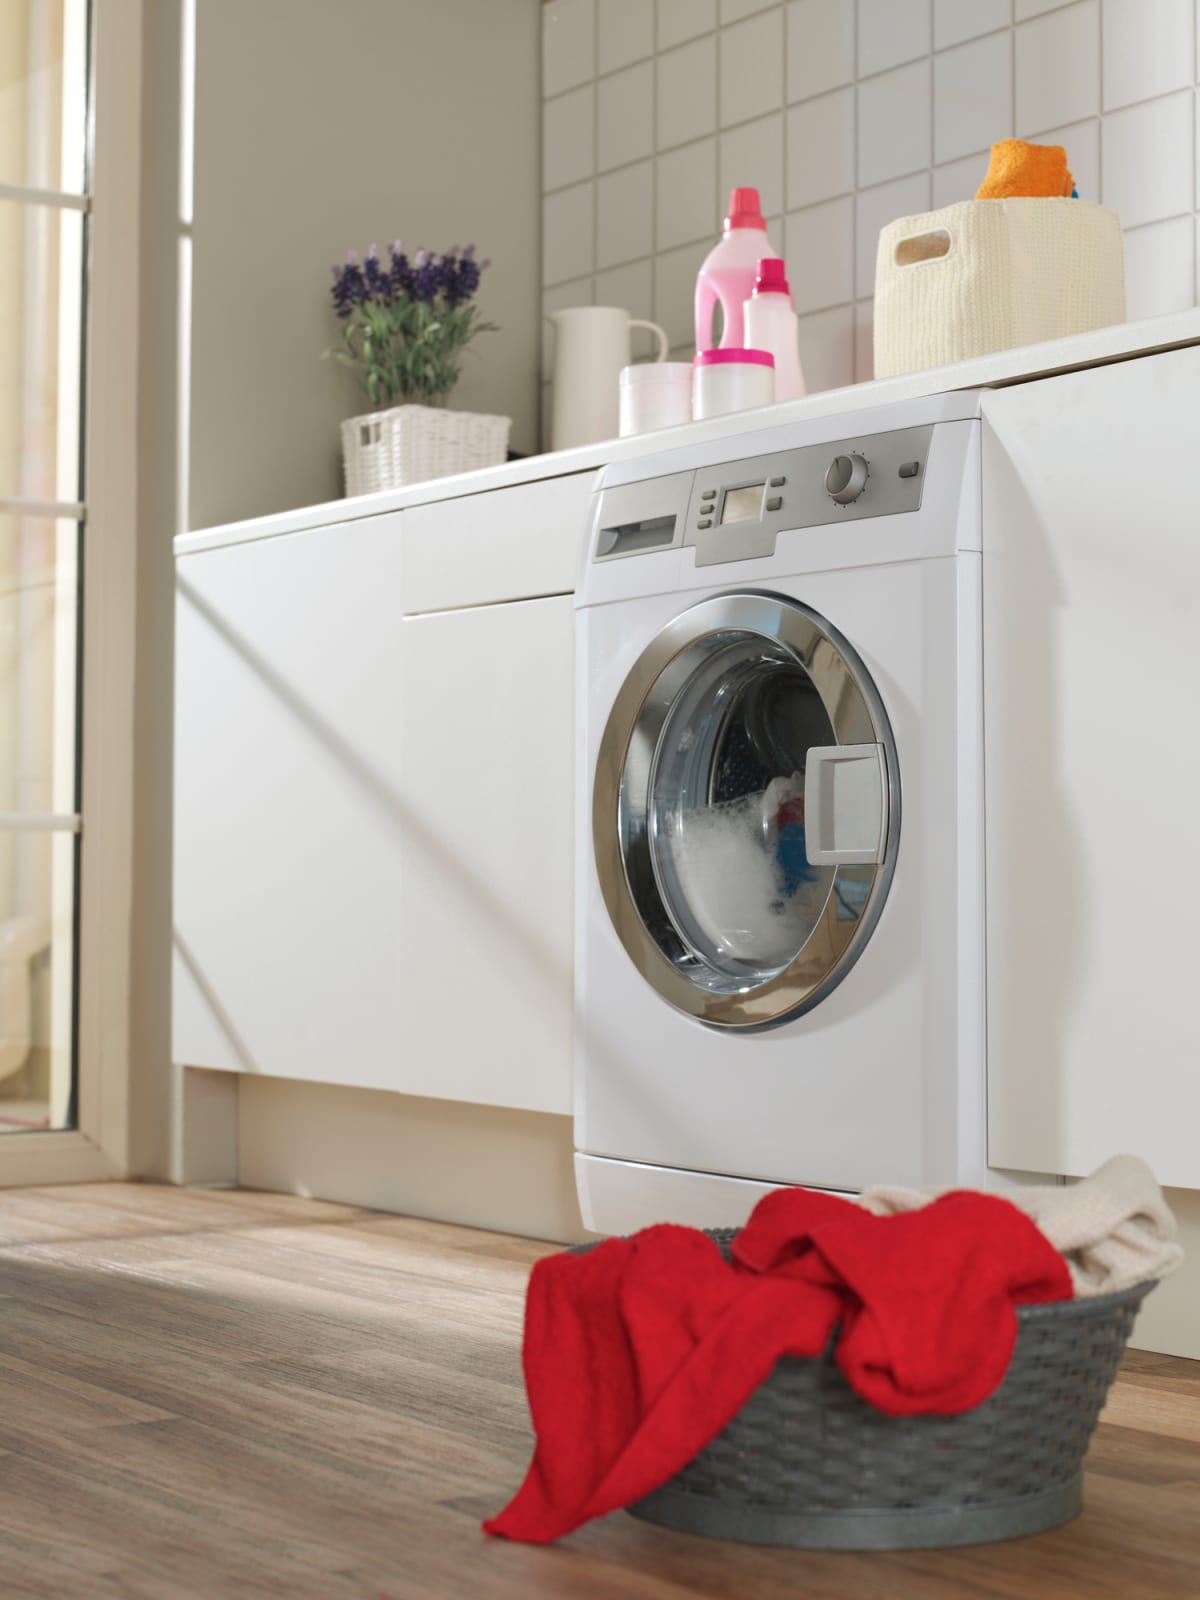 A laundry room with washing machine and other cleaning agents